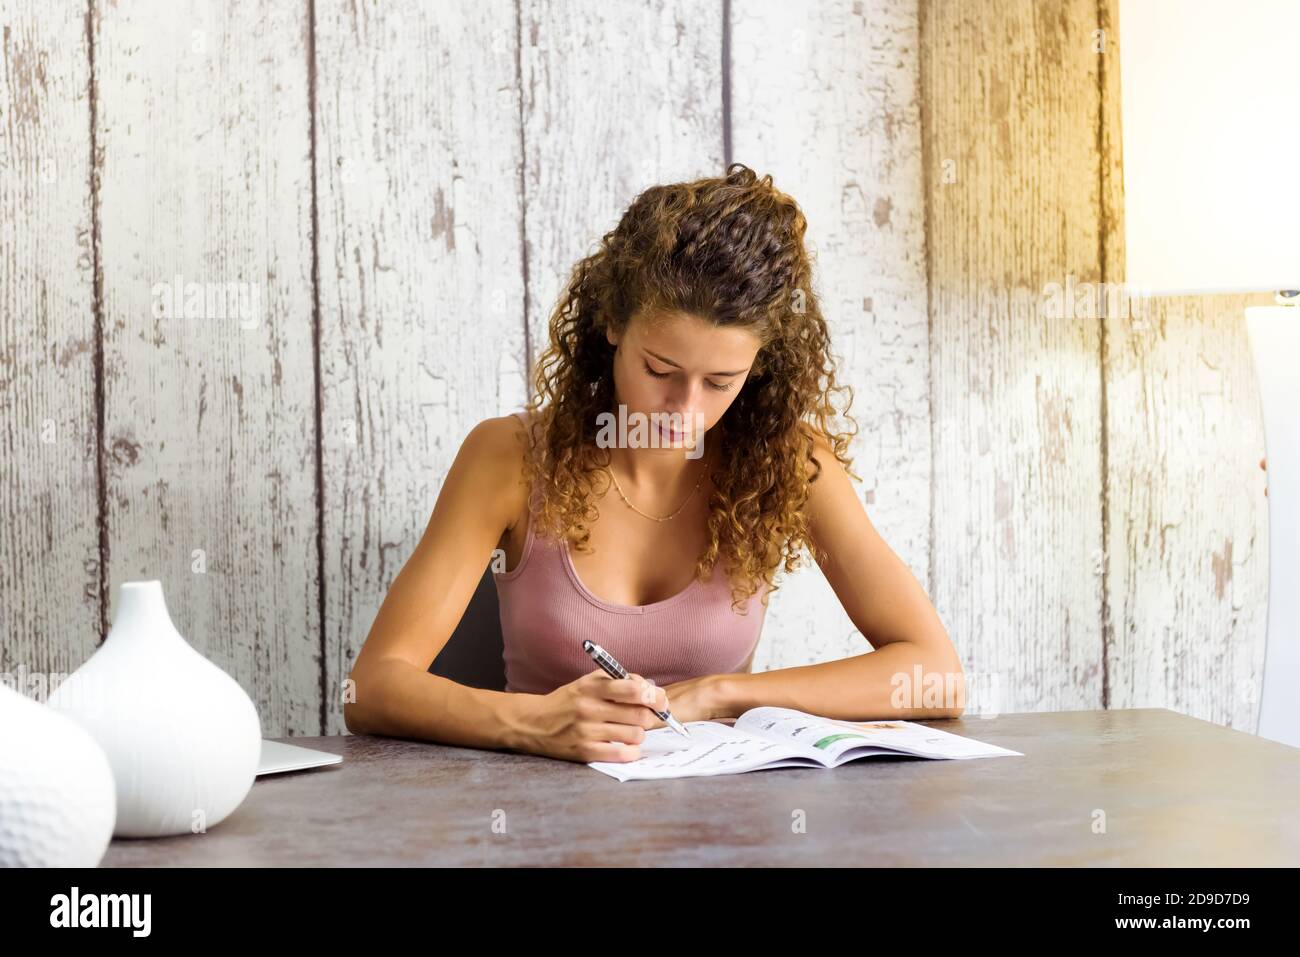 Young woman sitting filling in crossword puzzles in a magazine or book concentrating on solving the clues seated at a table at home Stock Photo